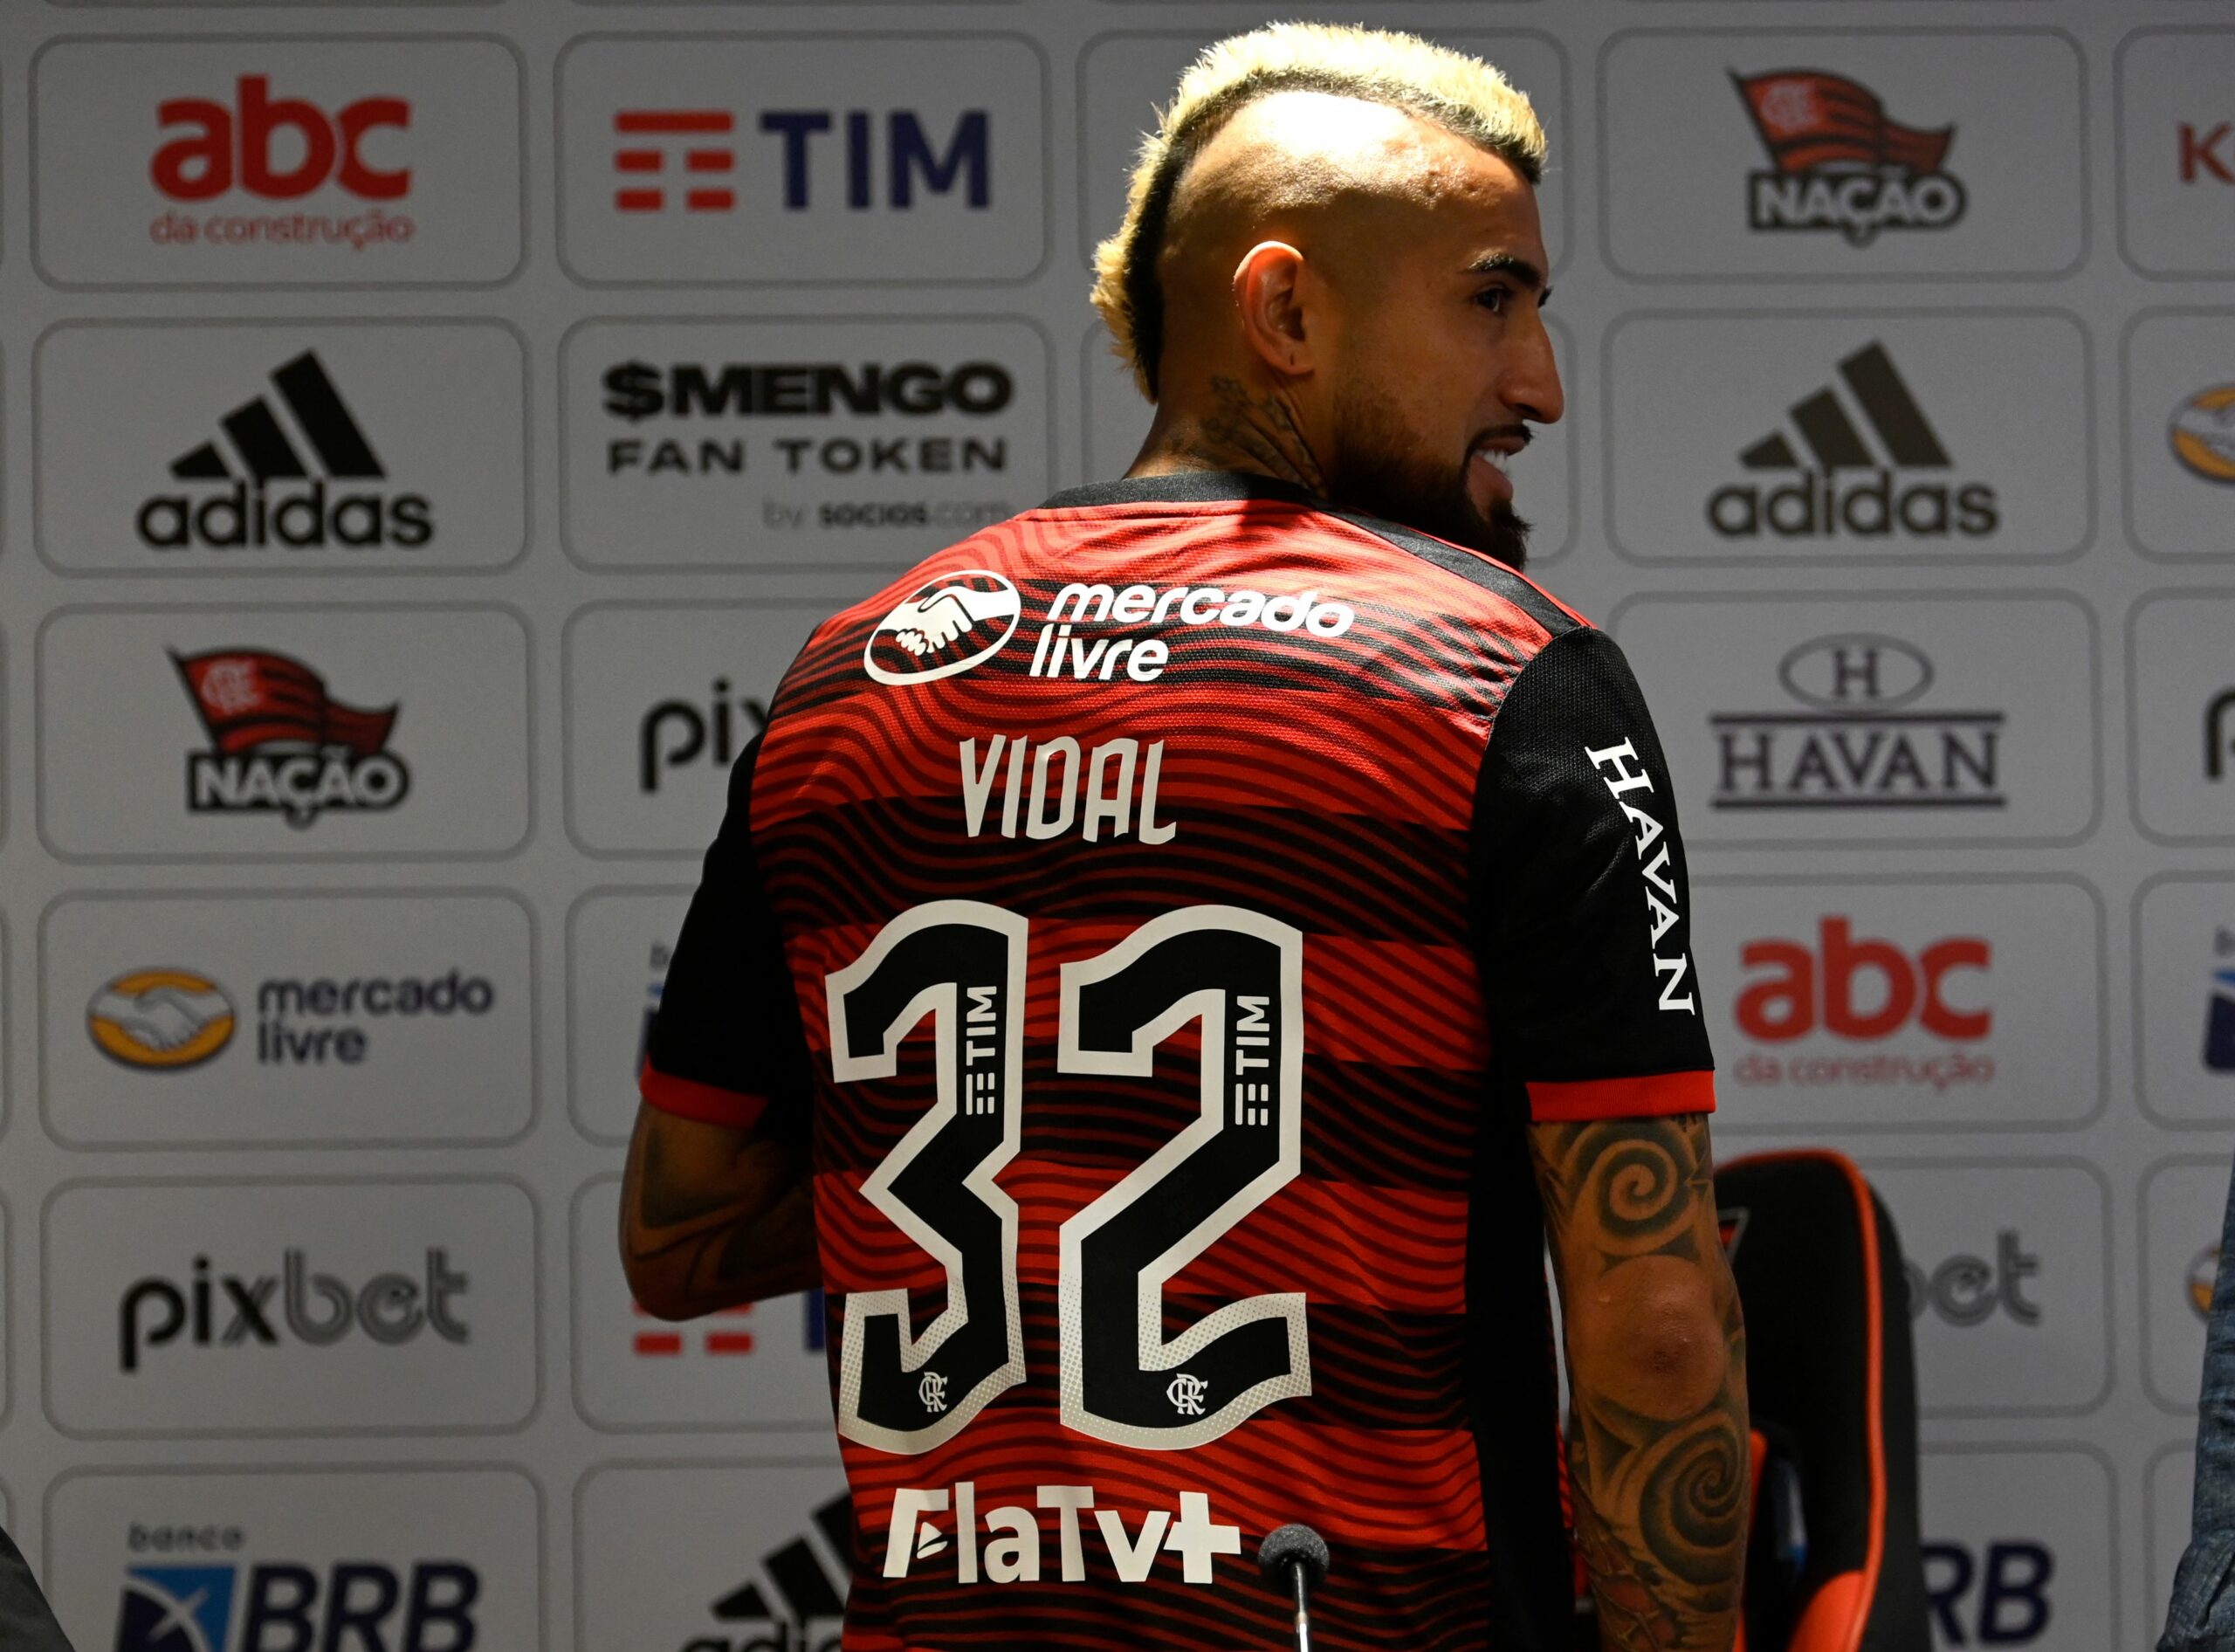 Chile's footballer Arturo Vidal is seen during his presentation as new player of Brazilian team Flamengo at the Ninho do Urubu training center in Rio de Janeiro, Brazil, on July 18, 2022. (Photo by MAURO PIMENTEL / AFP) (Photo by MAURO PIMENTEL/AFP via Getty Images)